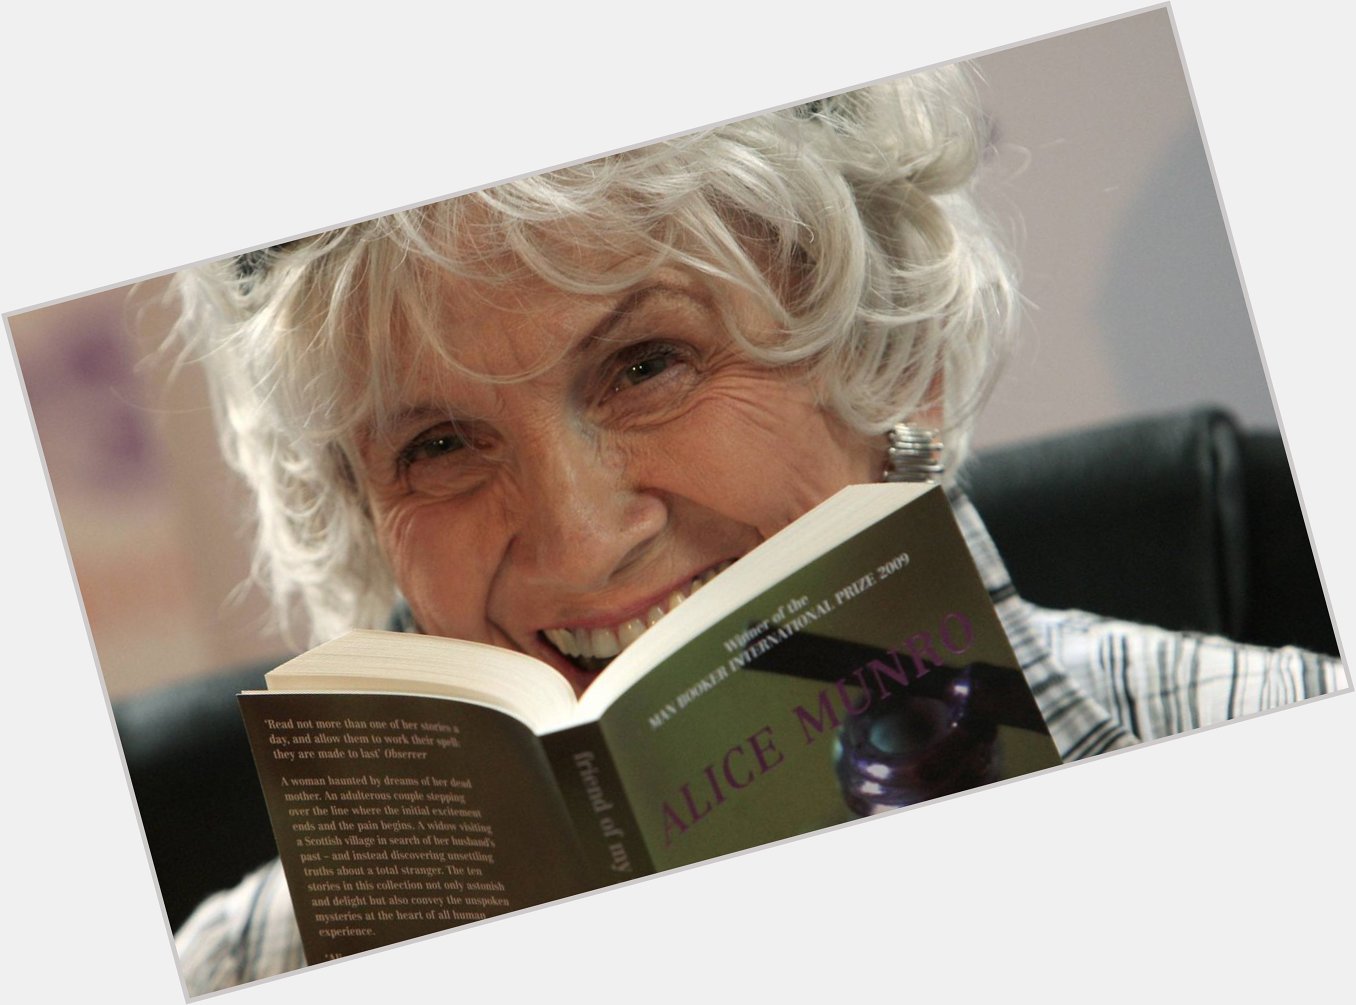 Happy Birthday to Alice Munro, short story and tireless self-editor. How many times have you revised a story? 